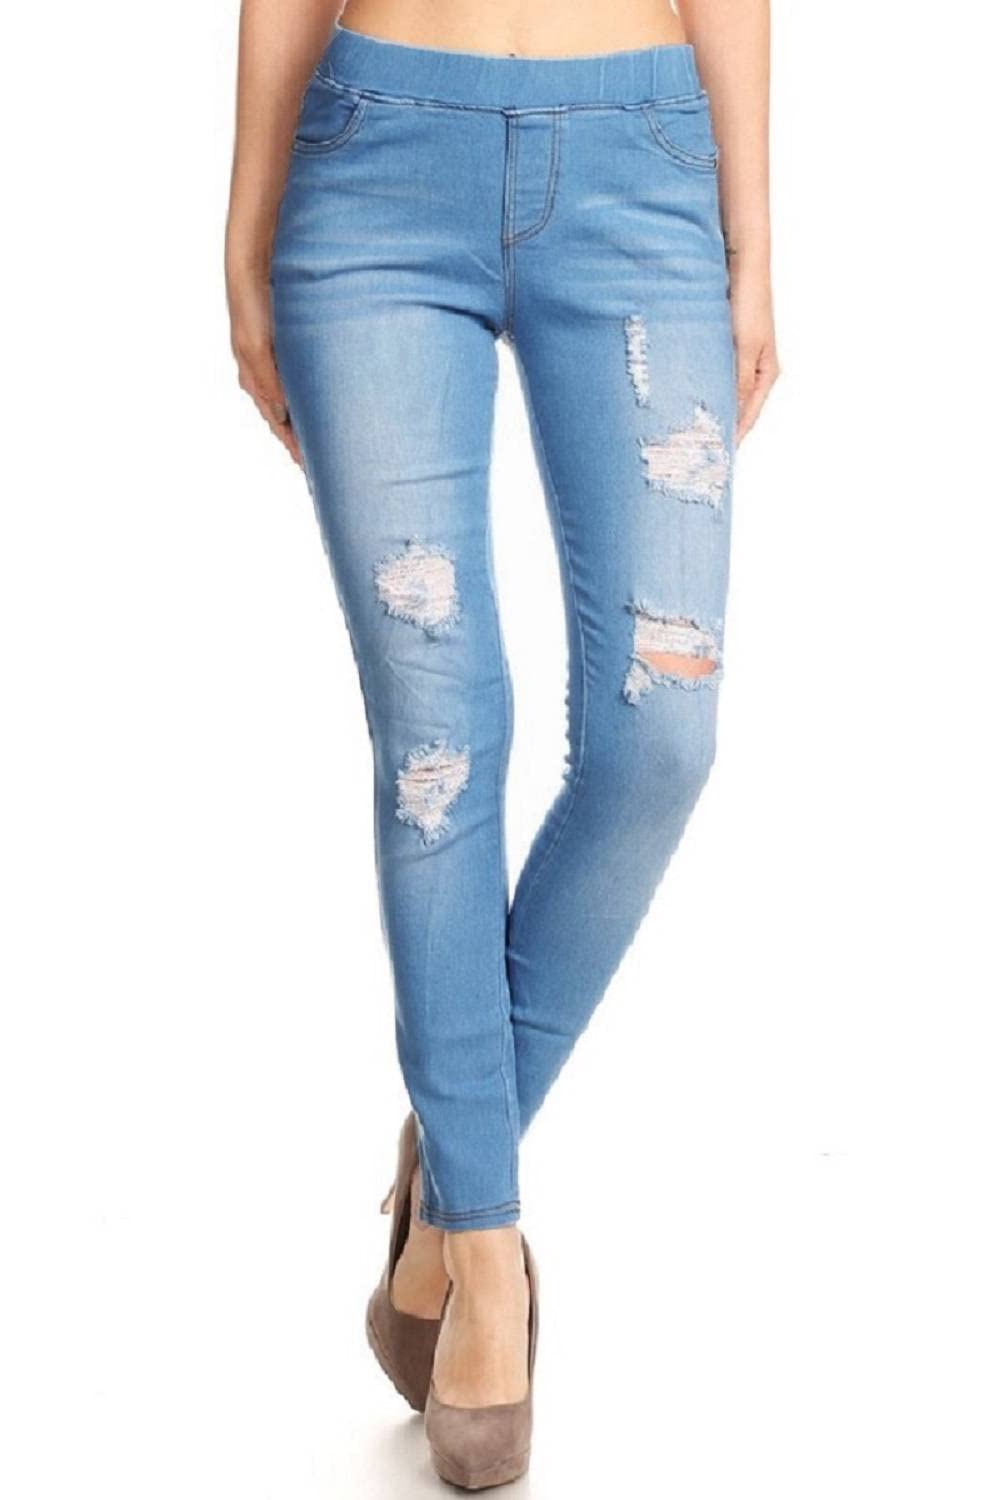 Book Cover Women's Stretch Pull-On Jeans Skinny Ripped Distressed Denim Jeggings Regular-Plus Size Small Blue-58